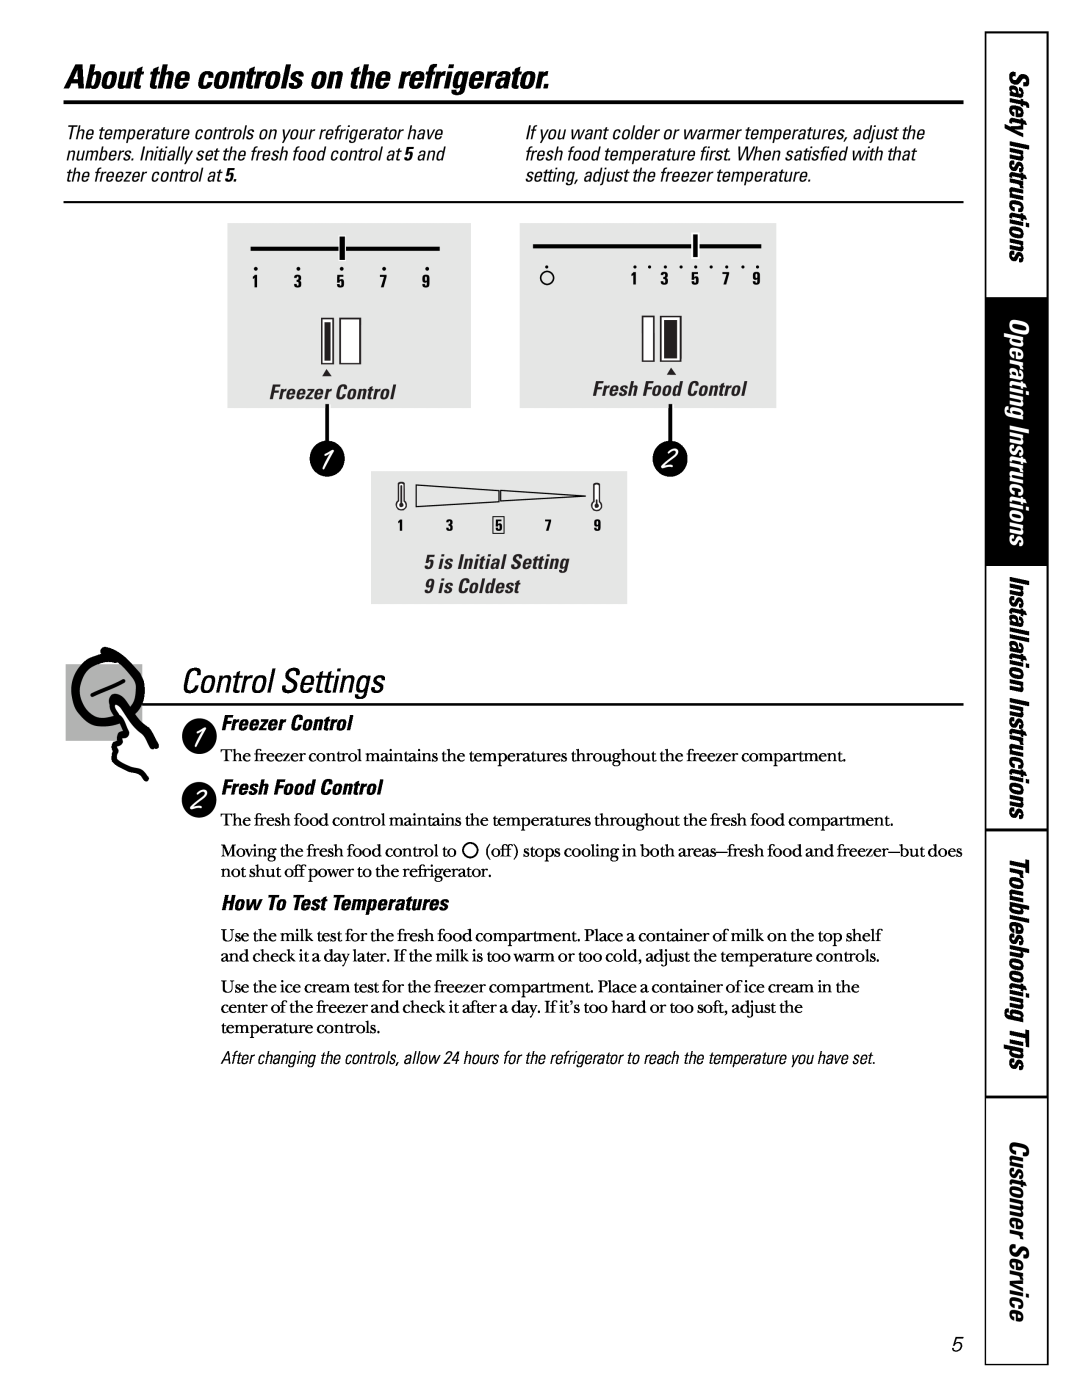 GE 162D6733P007 owner manual About the controls on the refrigerator, Control Settings, Freezer Control, Fresh Food Control 